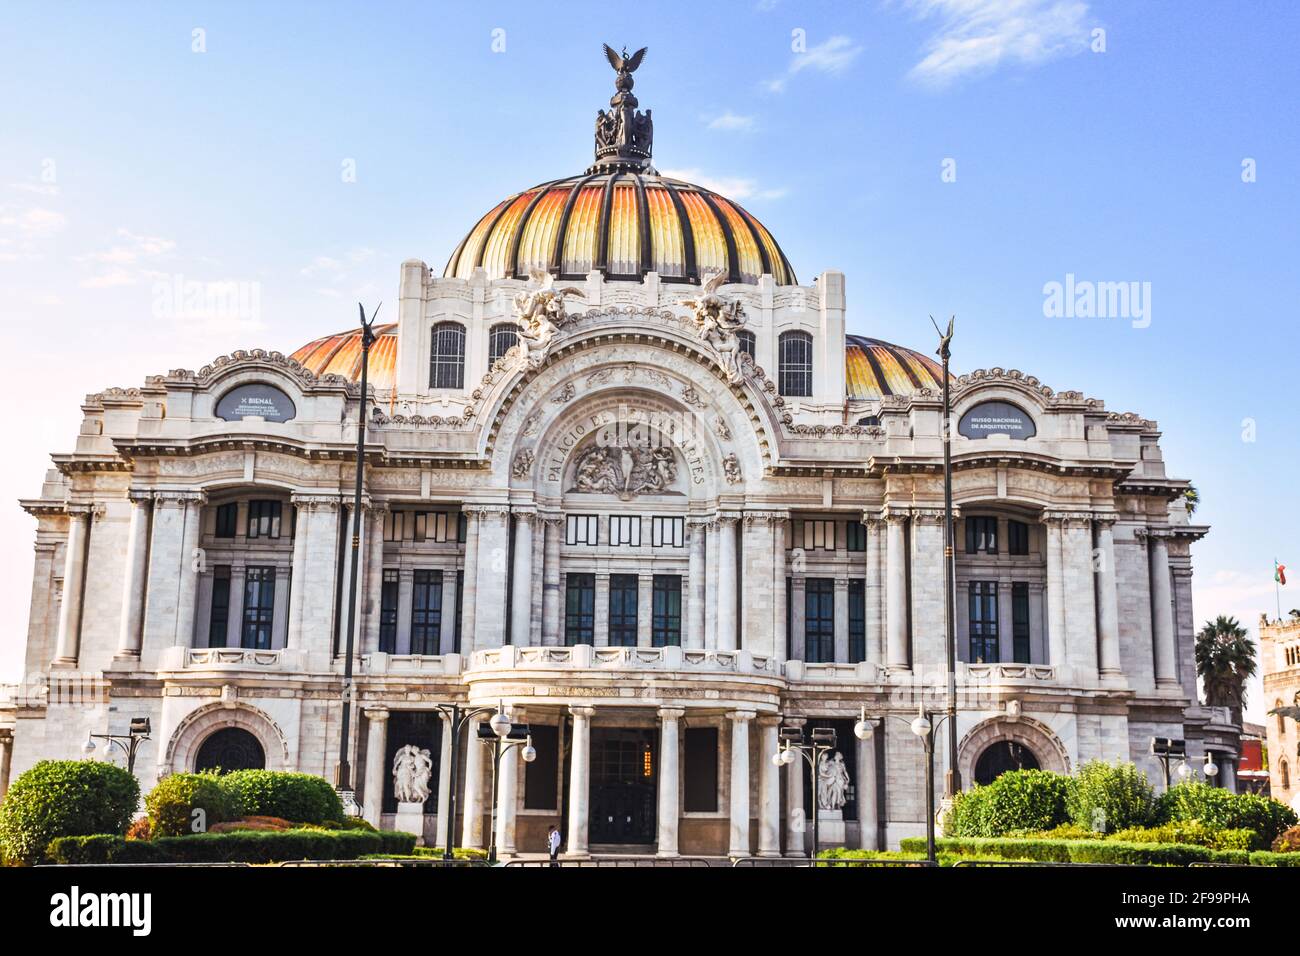 view of the Palacio de Bellas Artes or Palace of Fine Arts, a famous theater, museum and music venue in Mexico City closed during the coronavirus outb Stock Photo